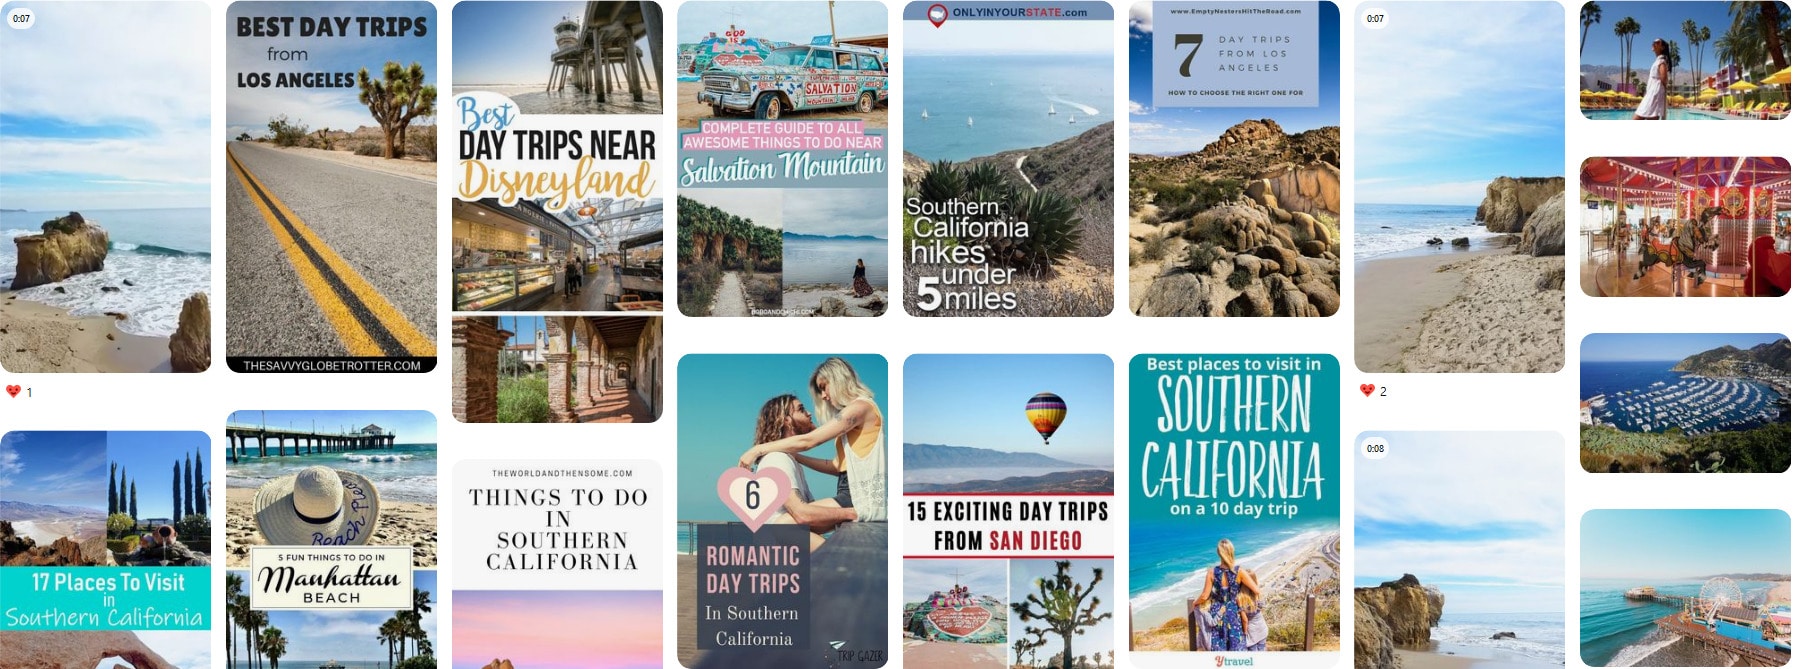 southern california day trips